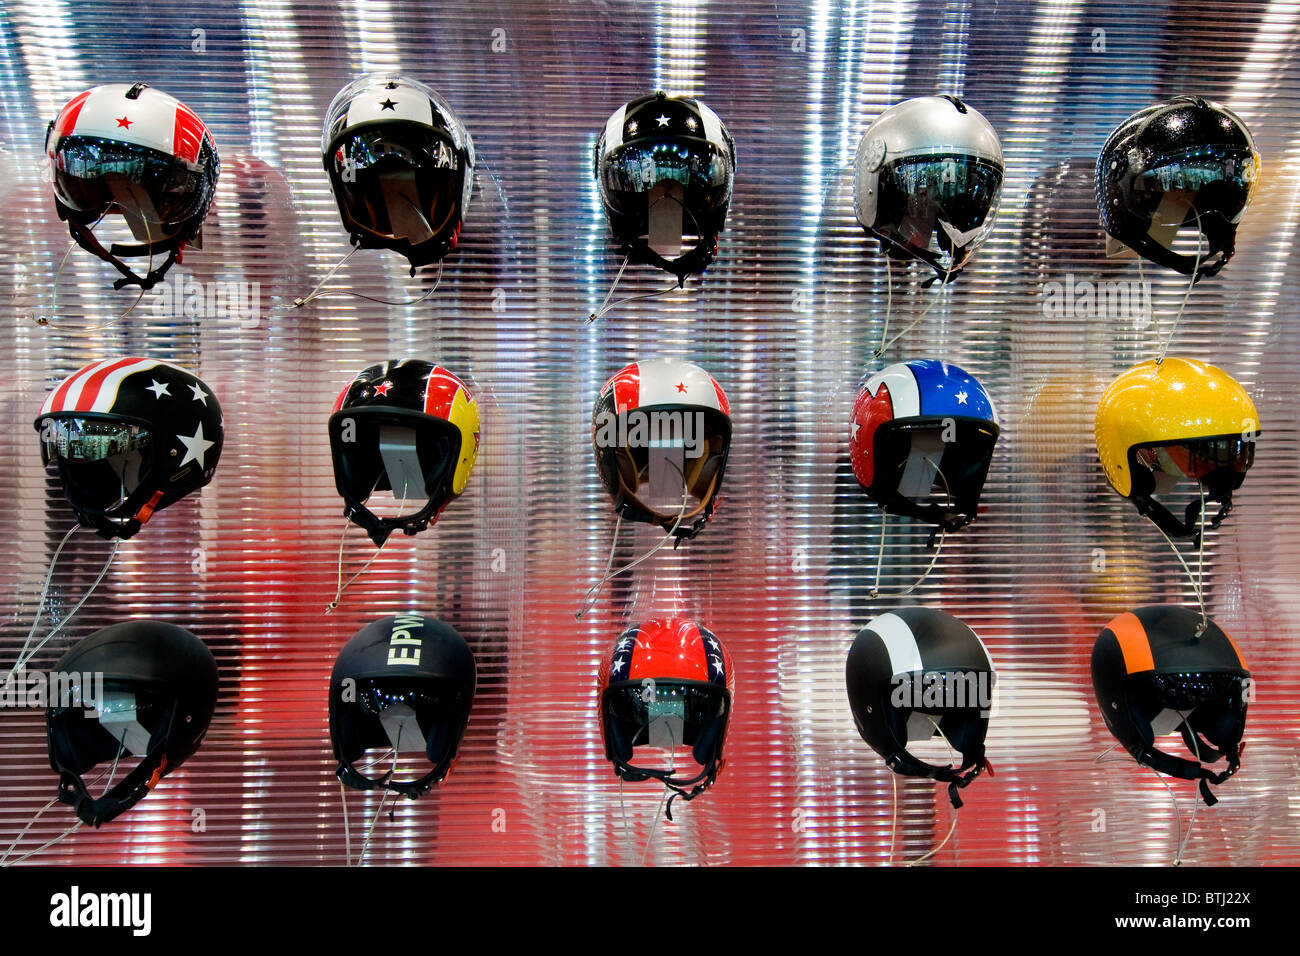 Helmets, Exibition bicycle and motorcycle, Milan 2010 Stock Photo